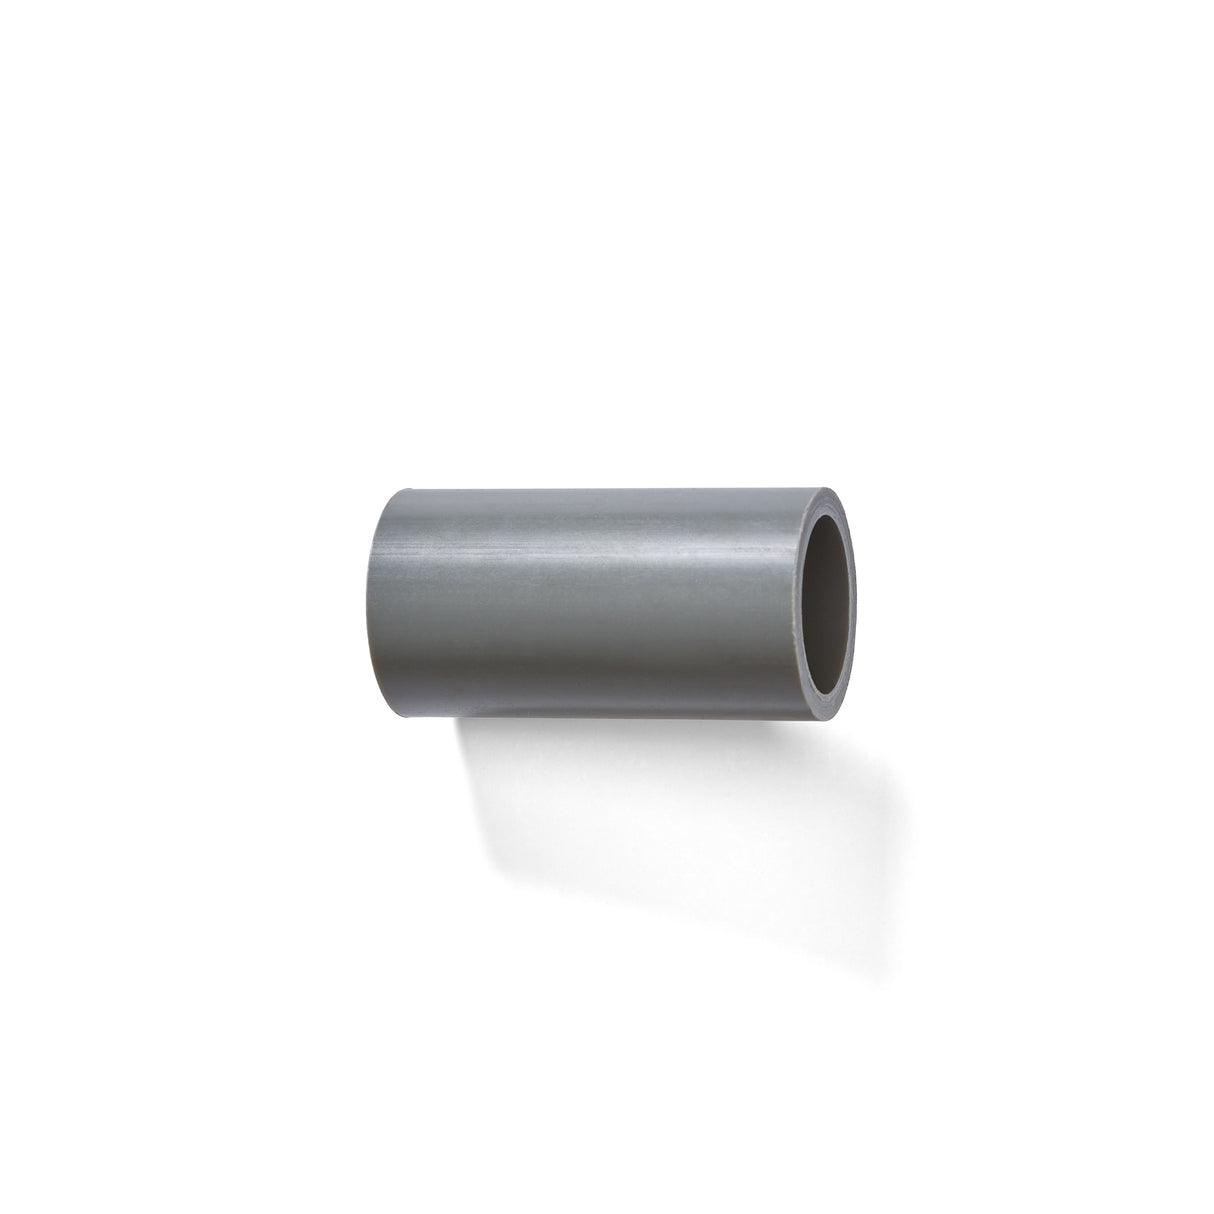 Polyform US one inch diameter bushing for shackle